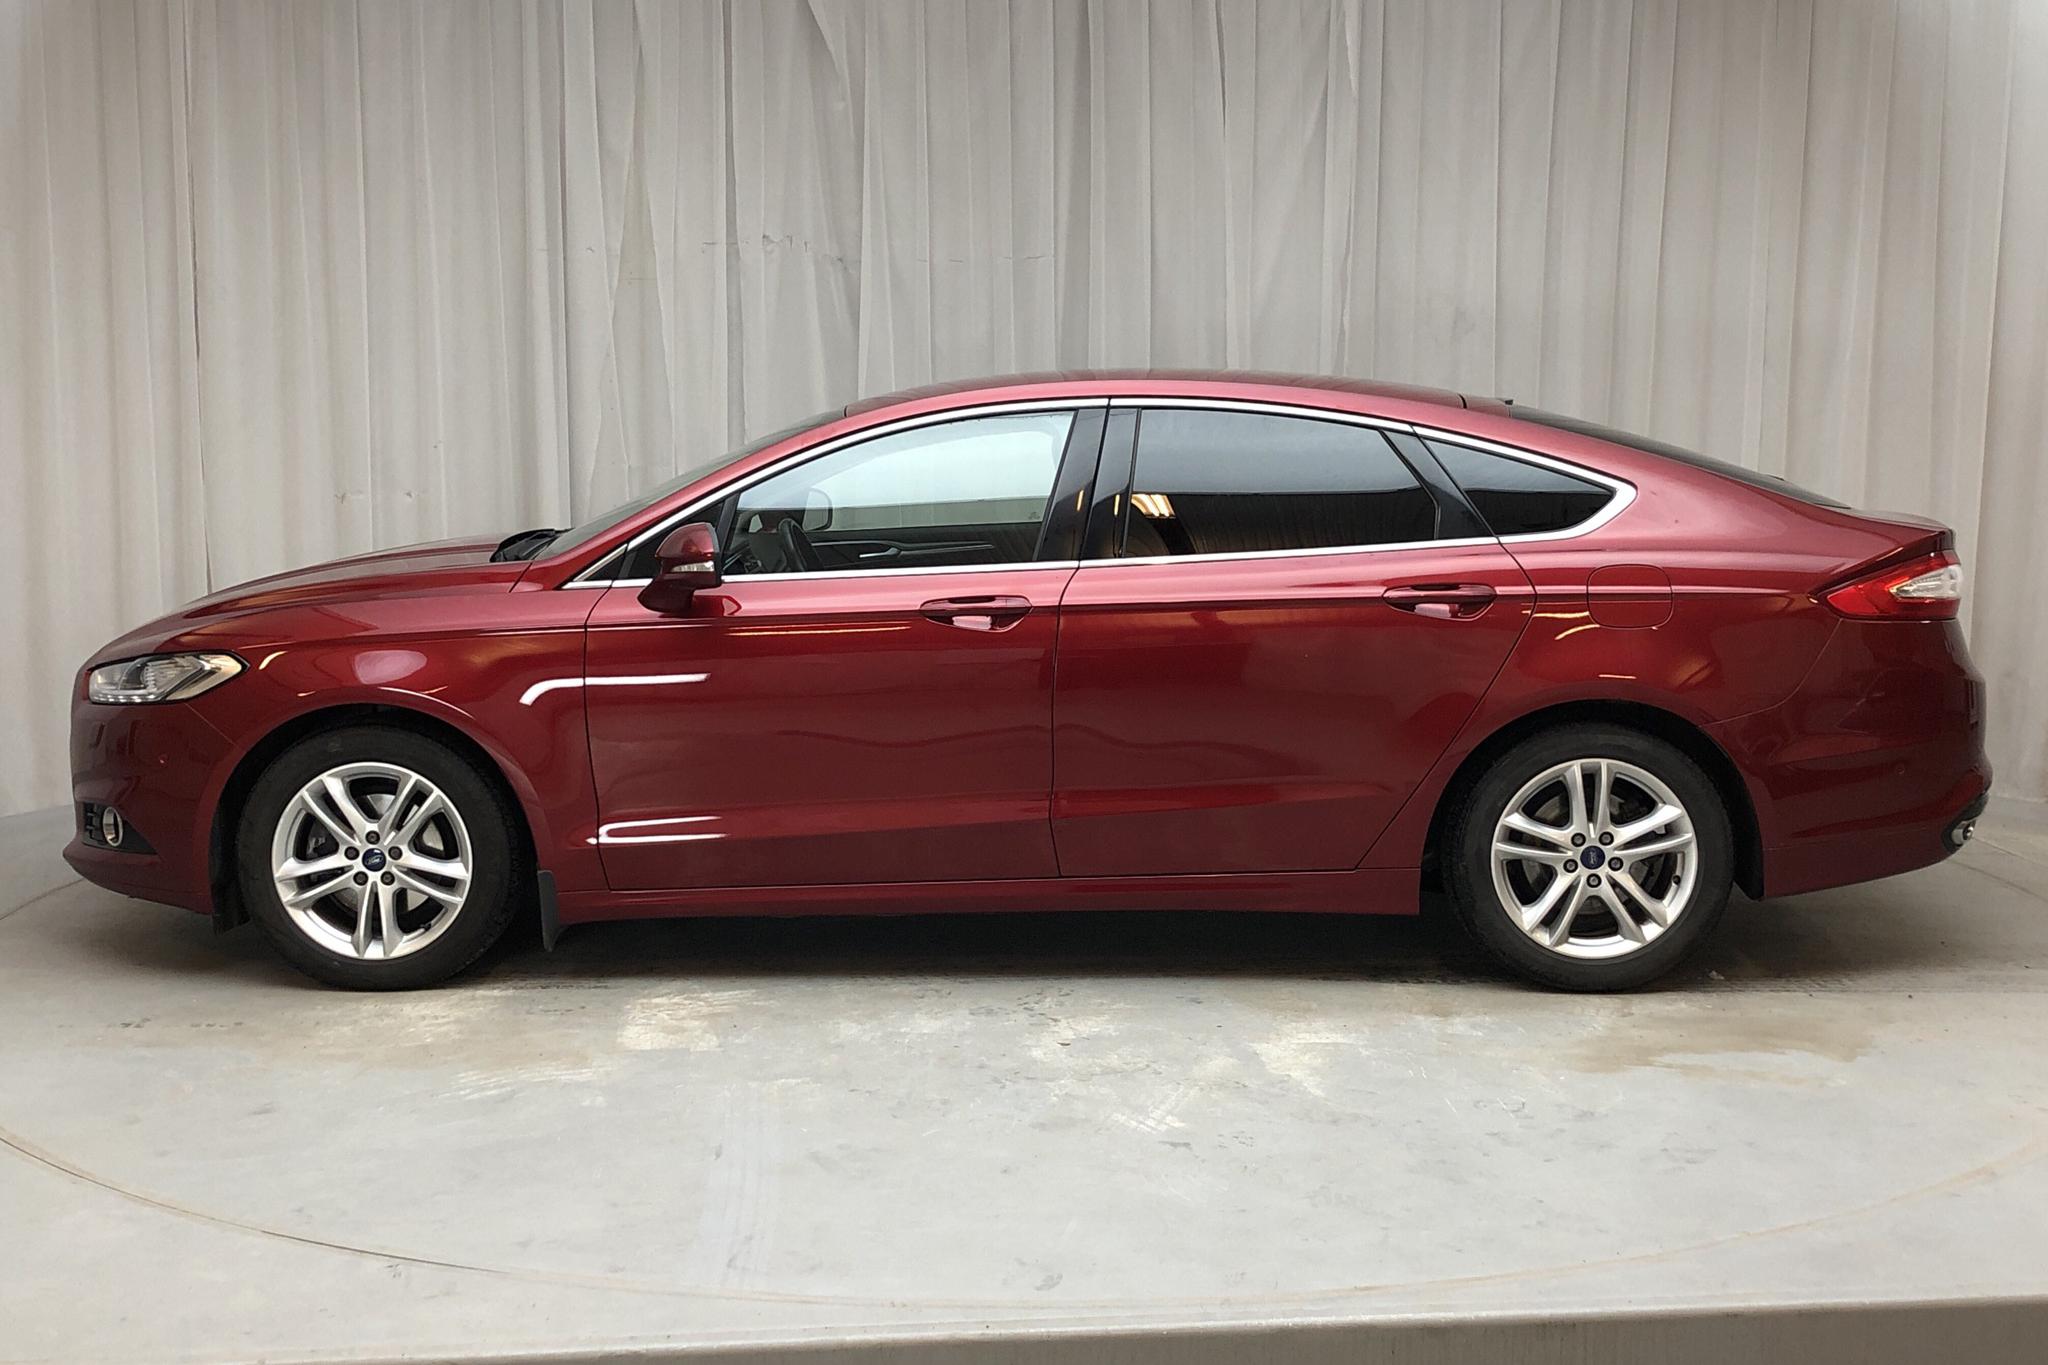 Ford Mondeo 2.0 TDCi 5dr (180hk) - 169 000 km - Automatic - red - 2016